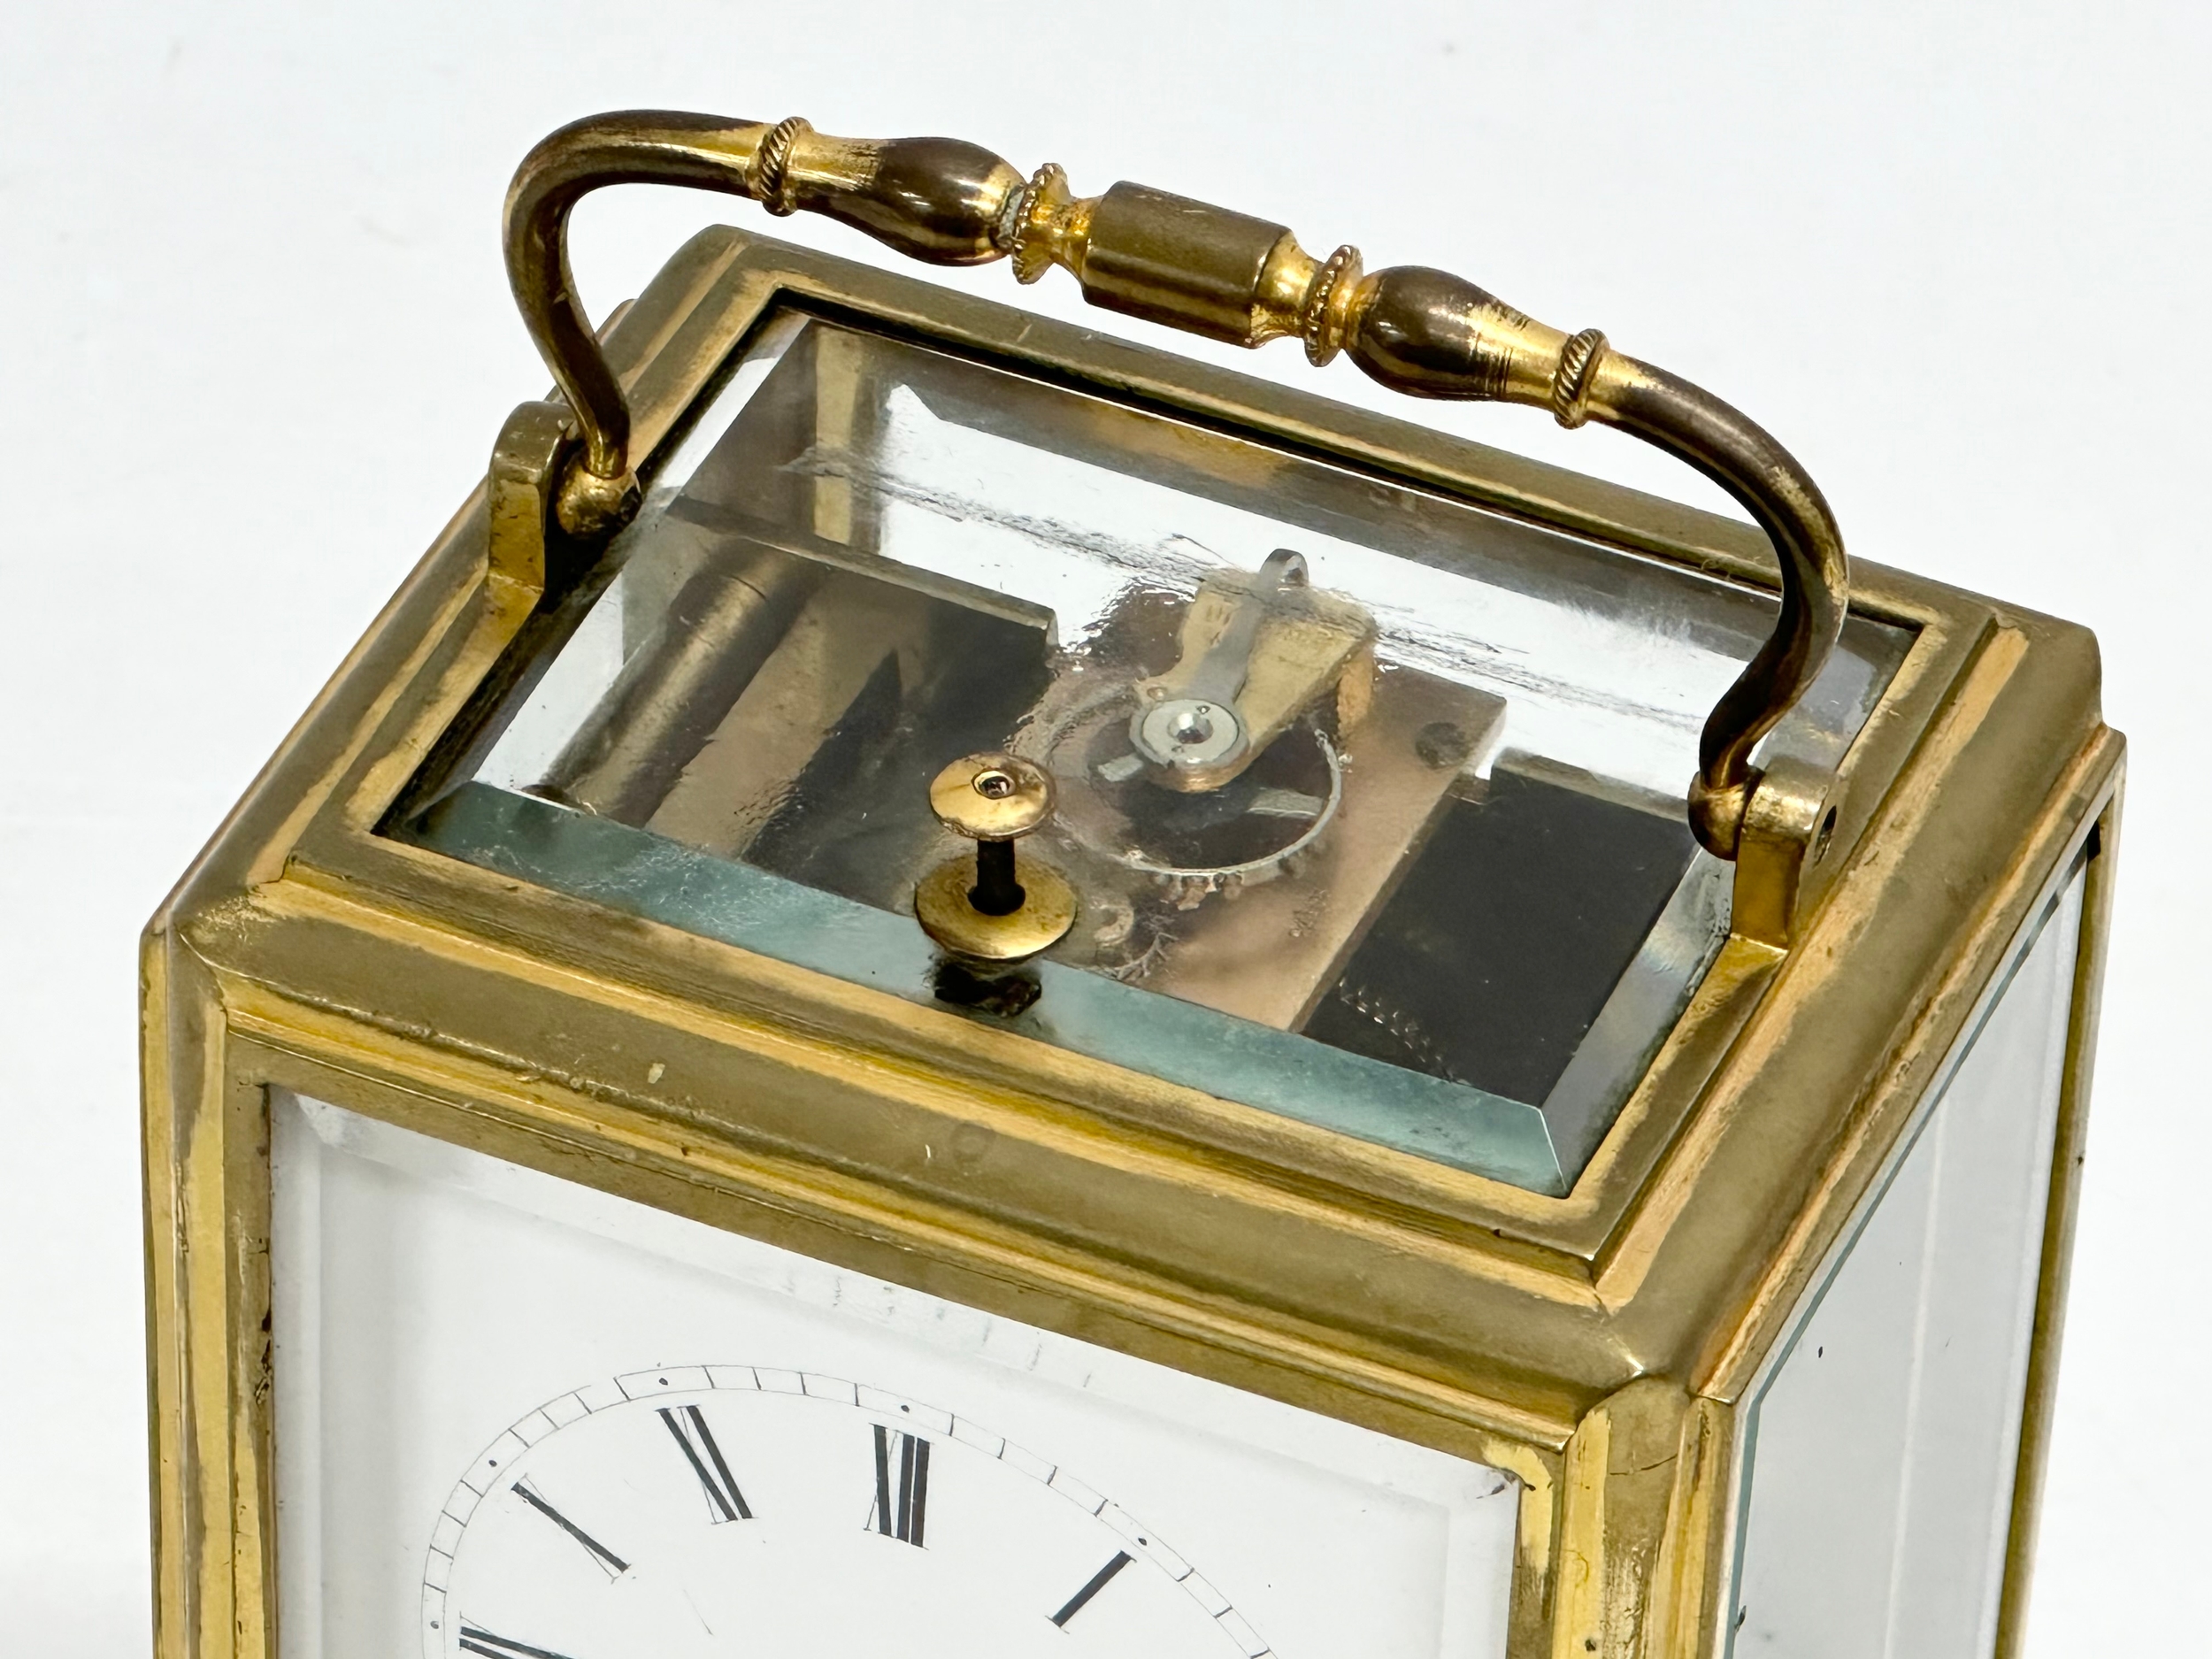 A rare mid 19th century Henry Marc brass Time Repeater Carriage Clock with 4 bevelled glass panels - Image 2 of 6